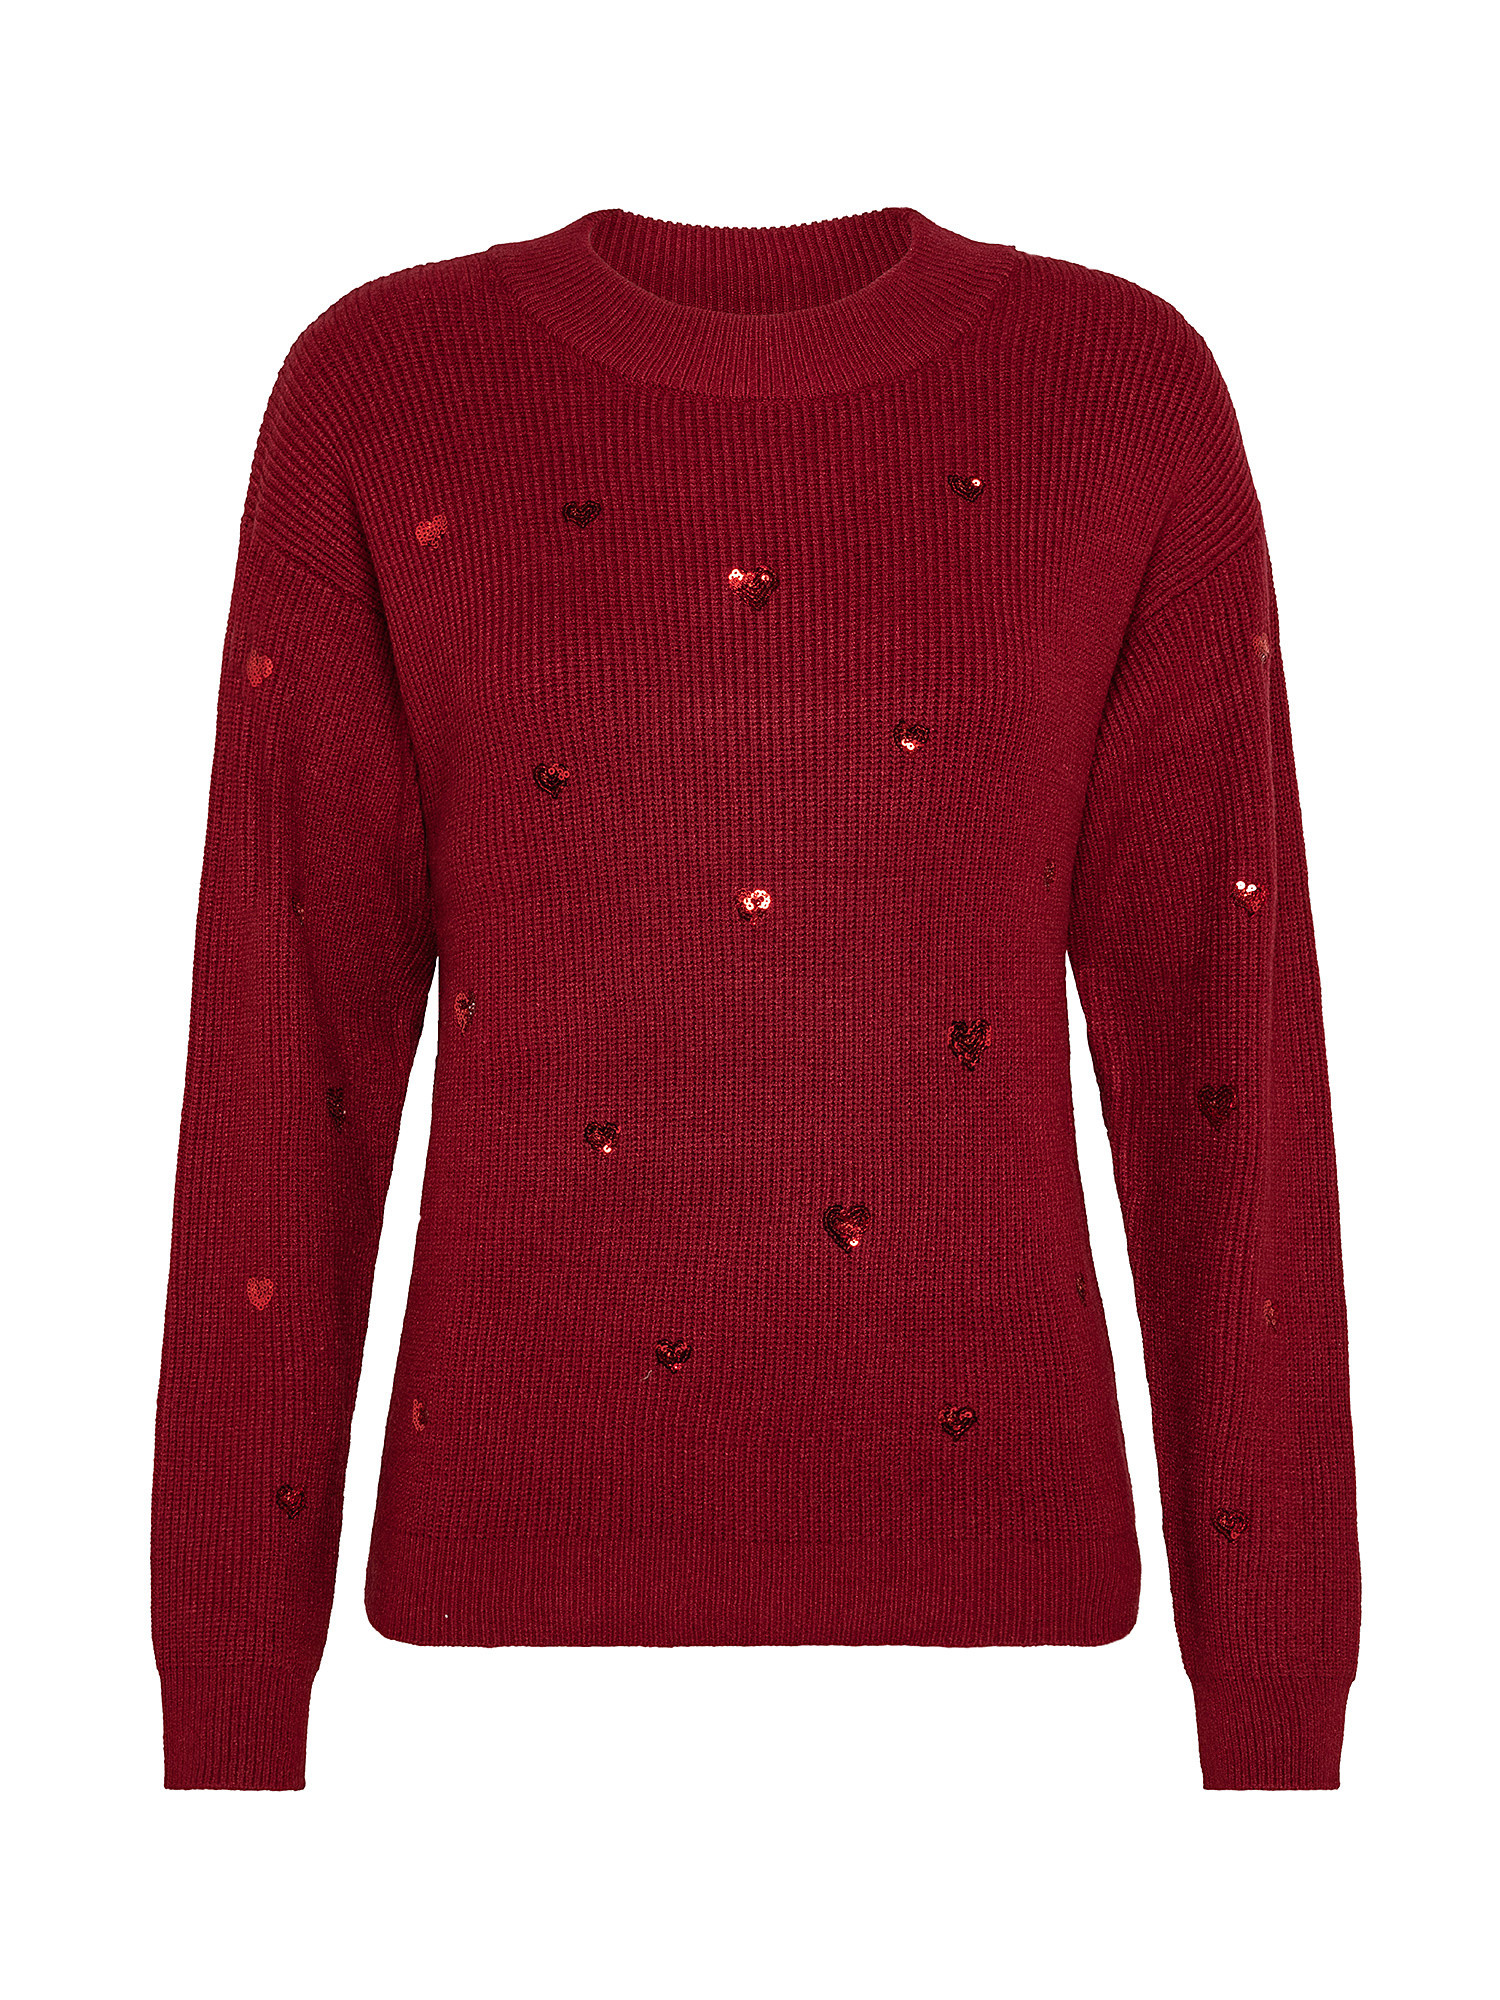 Sweater with sequined hearts, Red, large image number 0